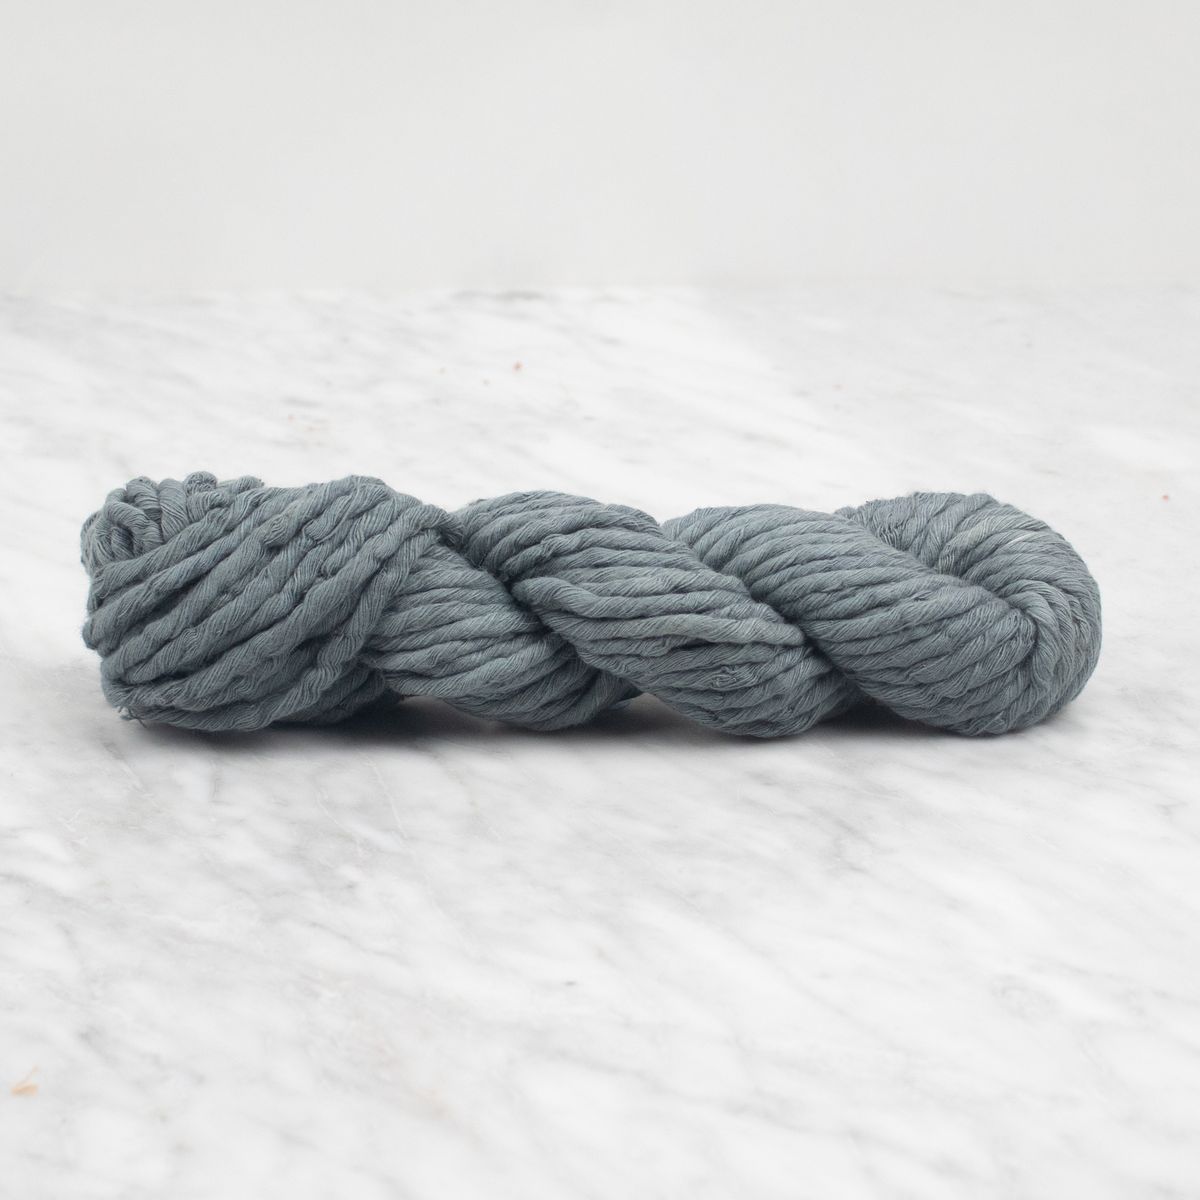 5mm Hand-Dyed Cotton String - Lunar Grey - 100 grams